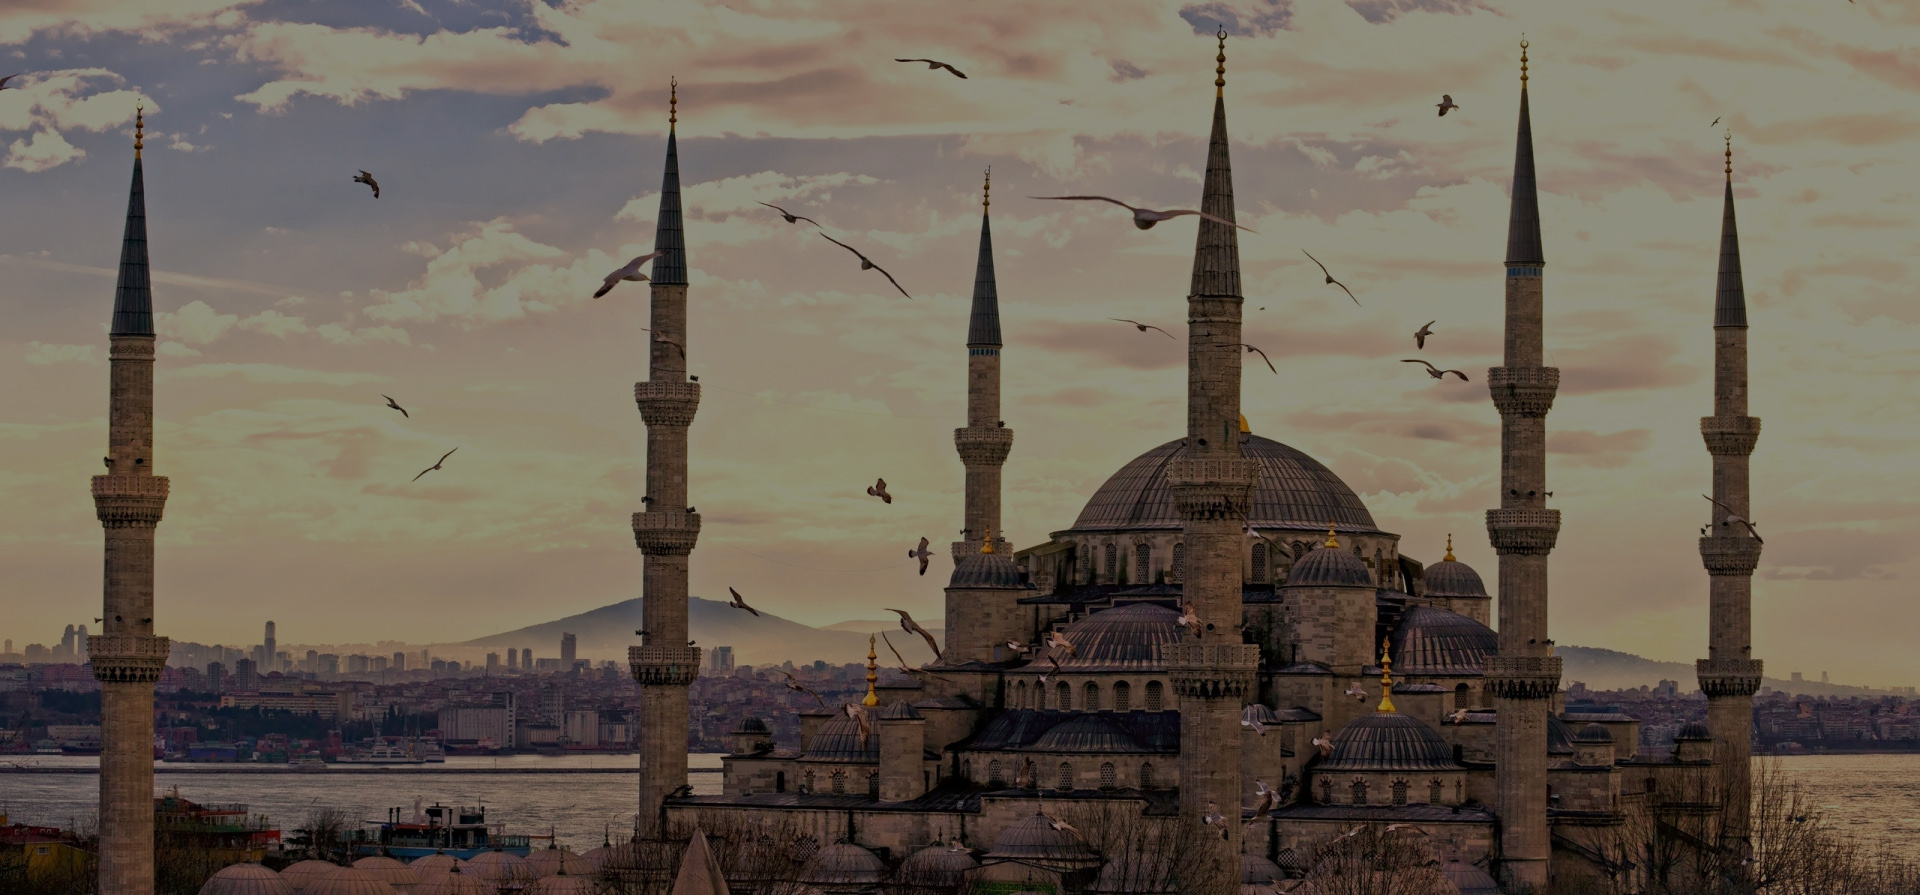 Turkey Tour packages from Bangalore, India